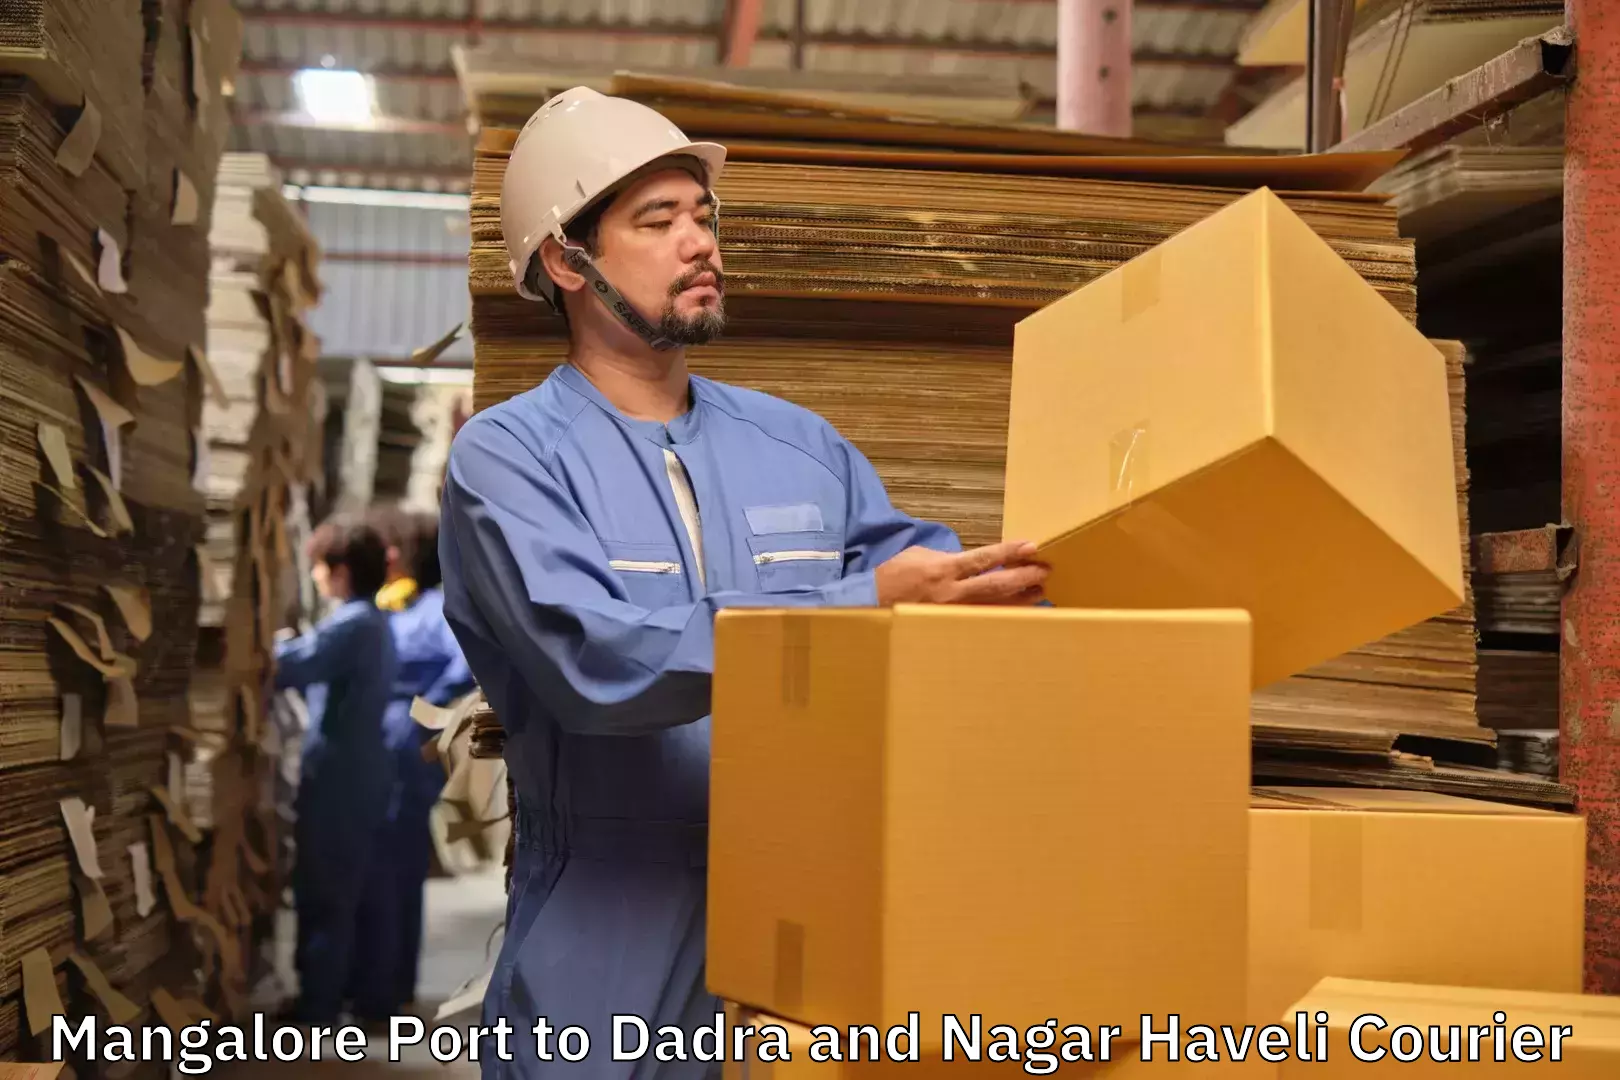 Luggage delivery providers Mangalore Port to Dadra and Nagar Haveli